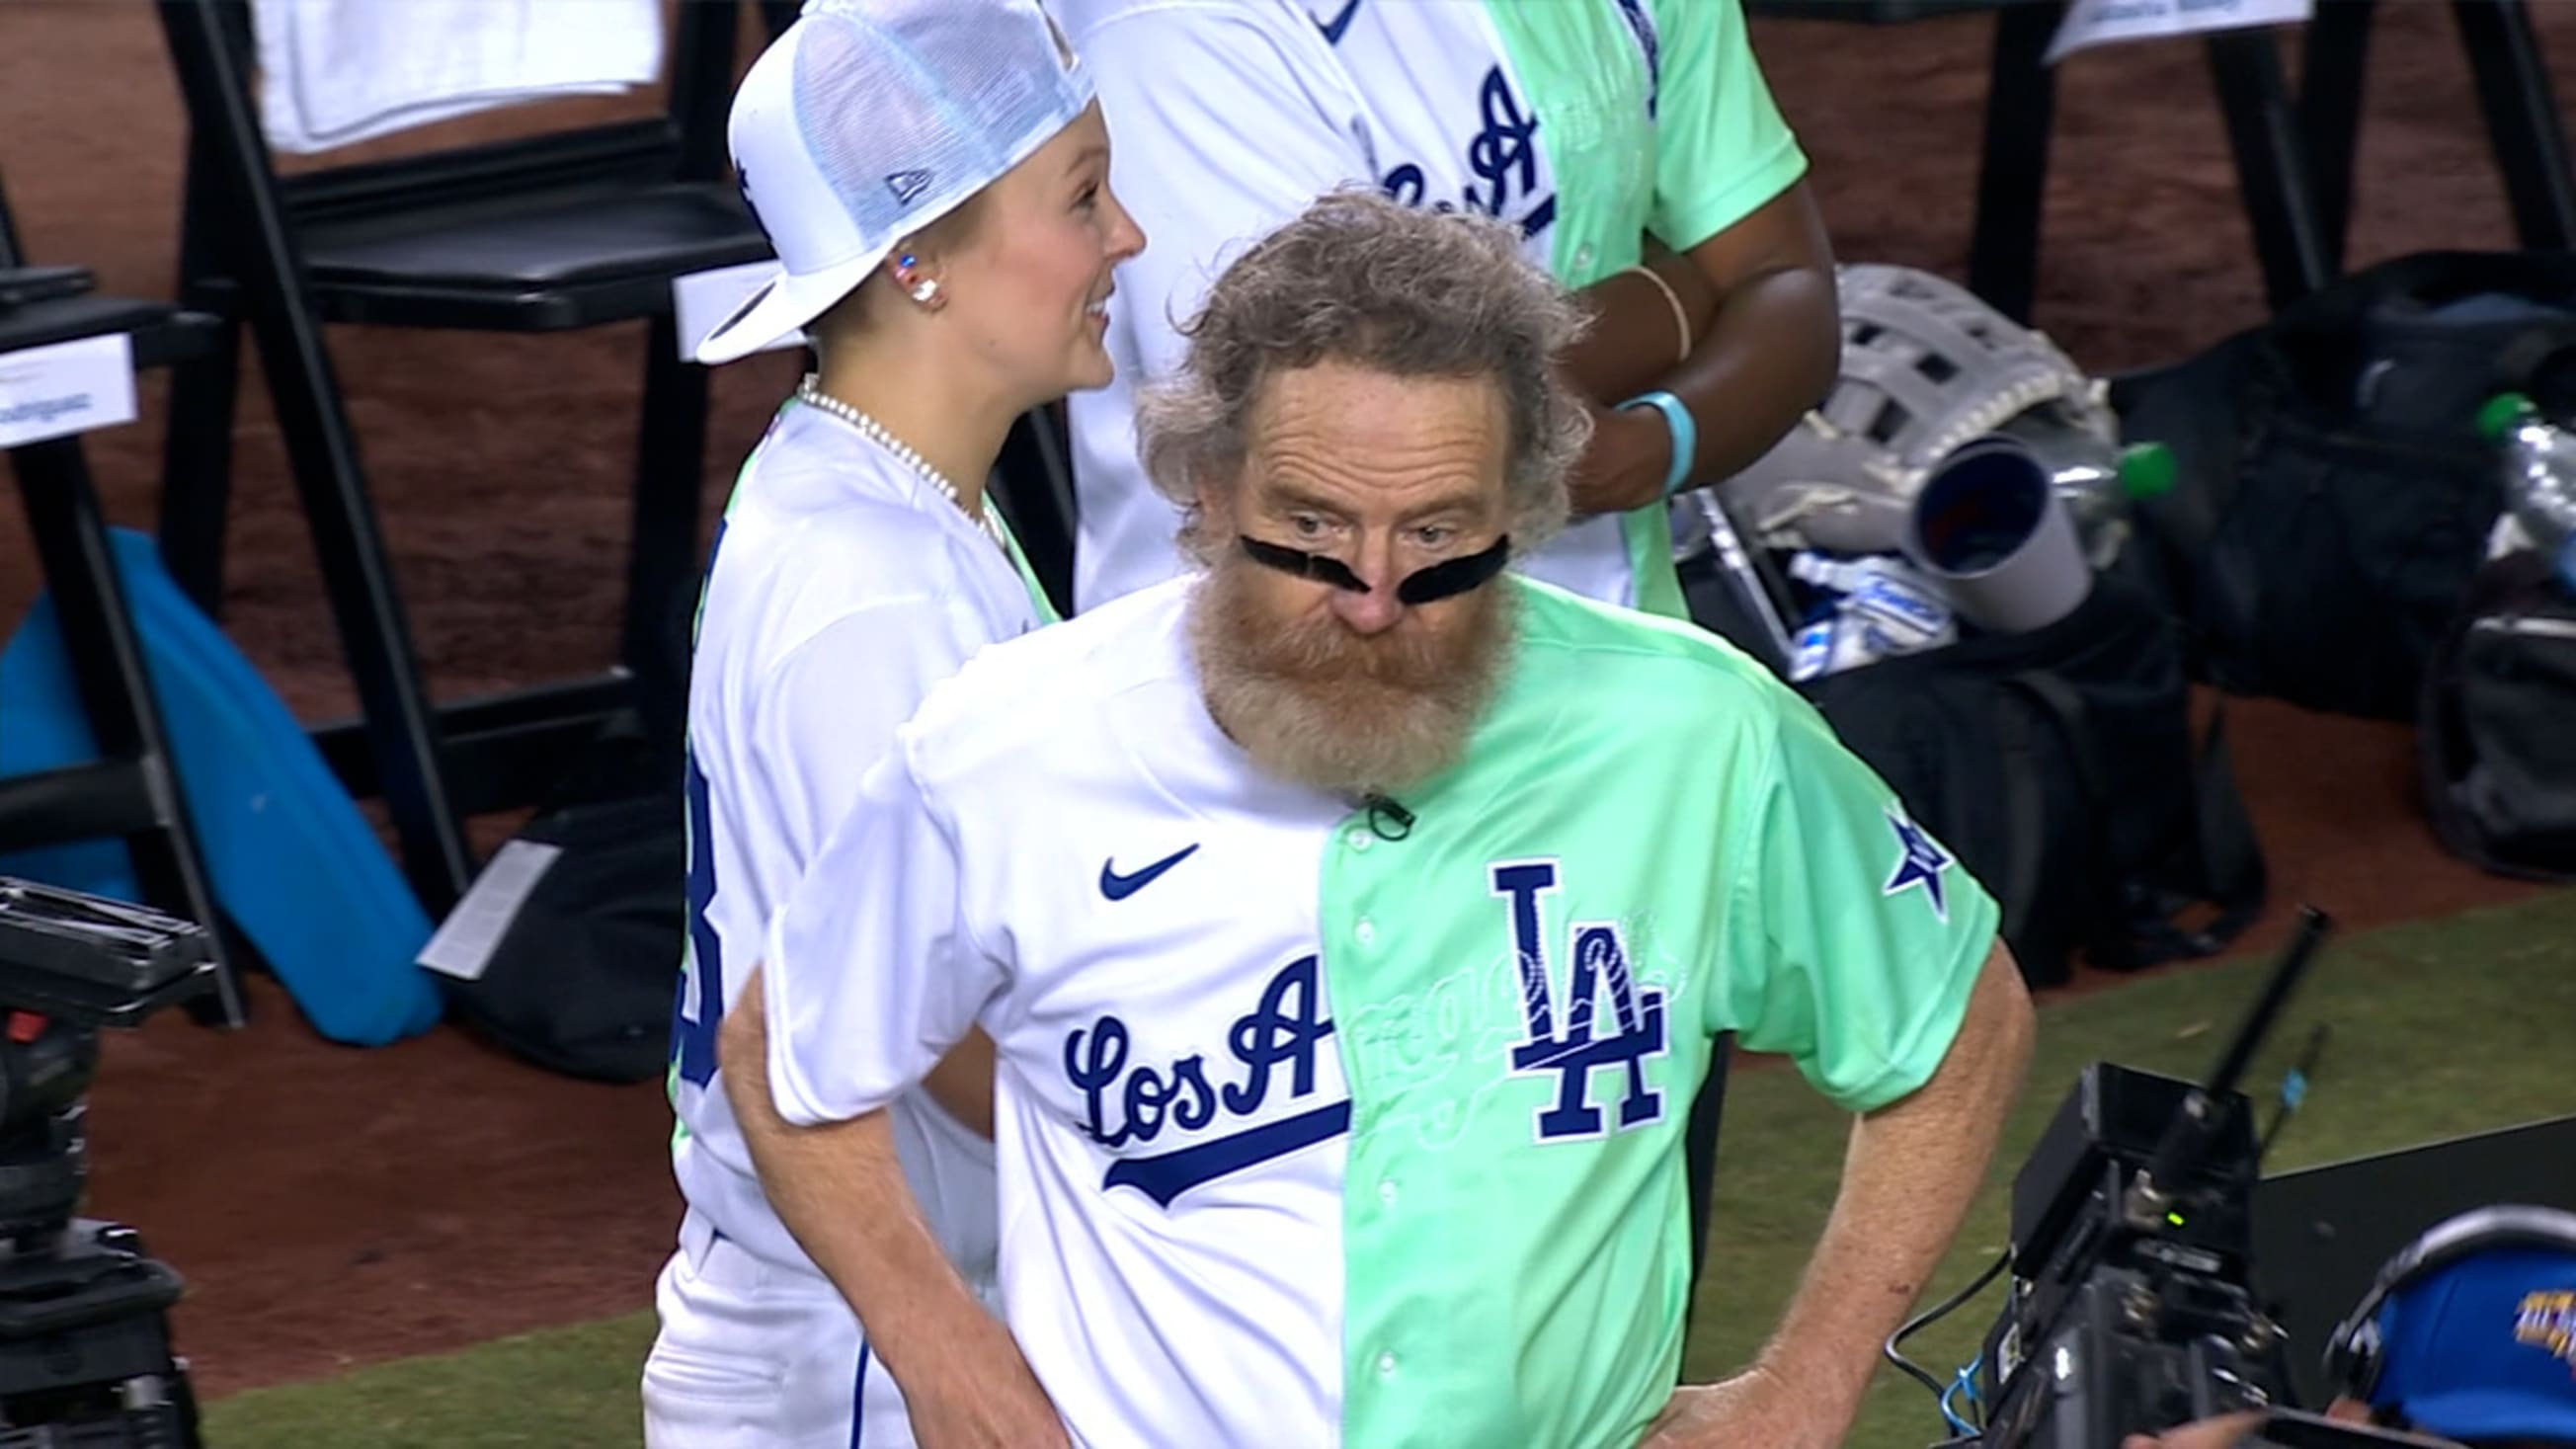 Bryan Cranston EJECTED from MLB All-Star celebrity softball game after  arguing with umpires and throwing bubble gum